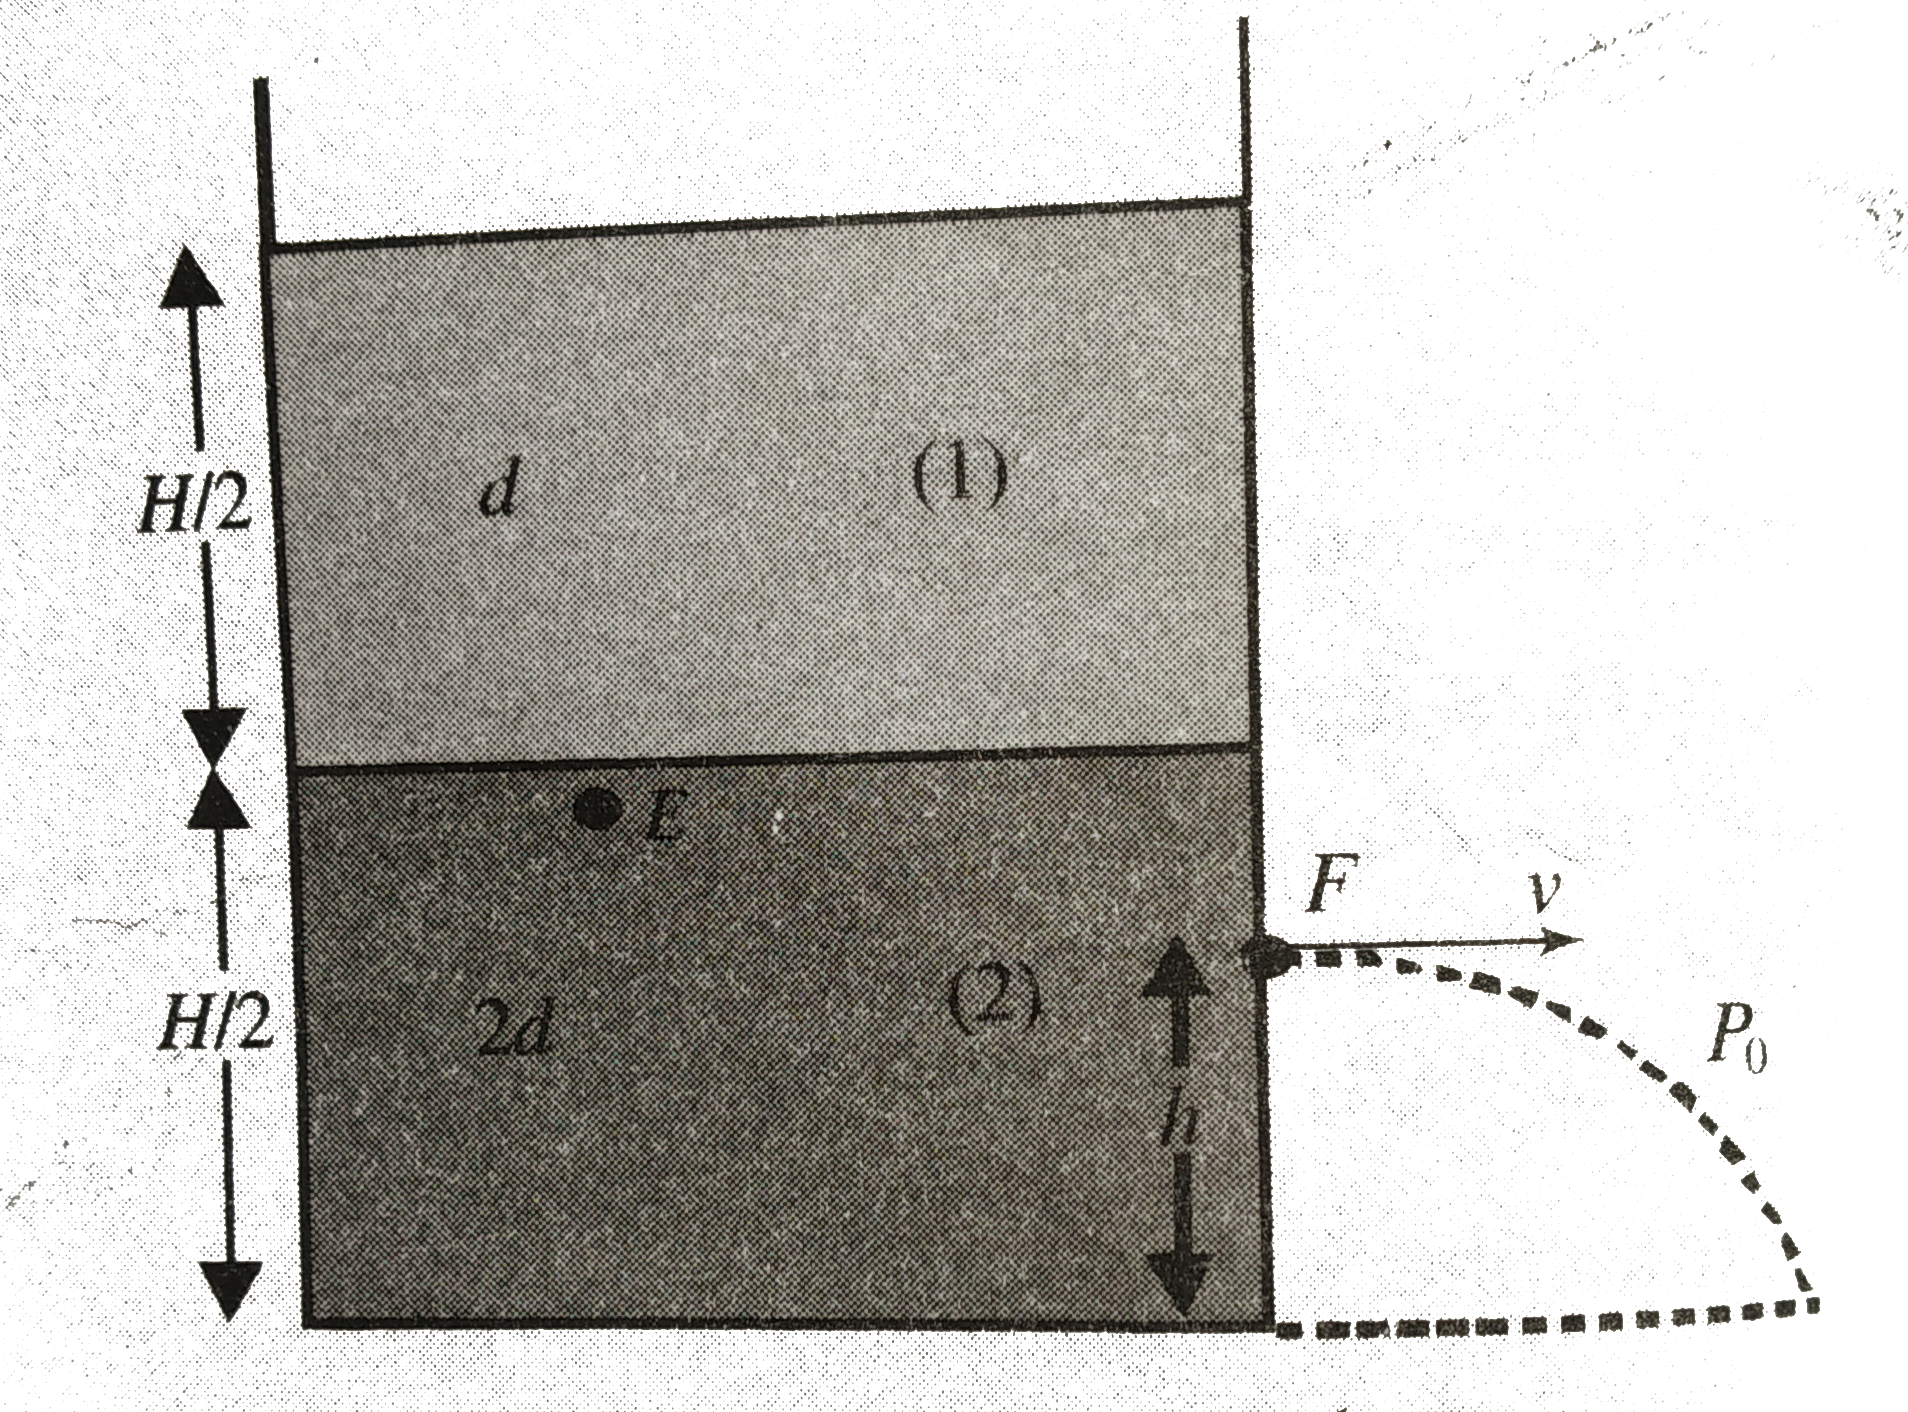 A container of large uniform cross sectonal area A, resting on horizontal surface, holds two immiscible non viscous and incompresible liquids of density d and 2d, each of height H/2 as shown in the figure. The lower density liquid is open to the atmosphere having pressure P(0). A tiny hole of area s(s<<A) is punched on the vertical side of the container at a height h(h<H/2). Determine      a.the initial speed of efflux of the liquid at the hole  b. the horizontal disance x travelled by the liquid initially   c. the height hm at which at the hole should be punched so that the liquid travels the maximum distance x(m) initially. also calculate x(m) (neglect air resistance inte calculations).